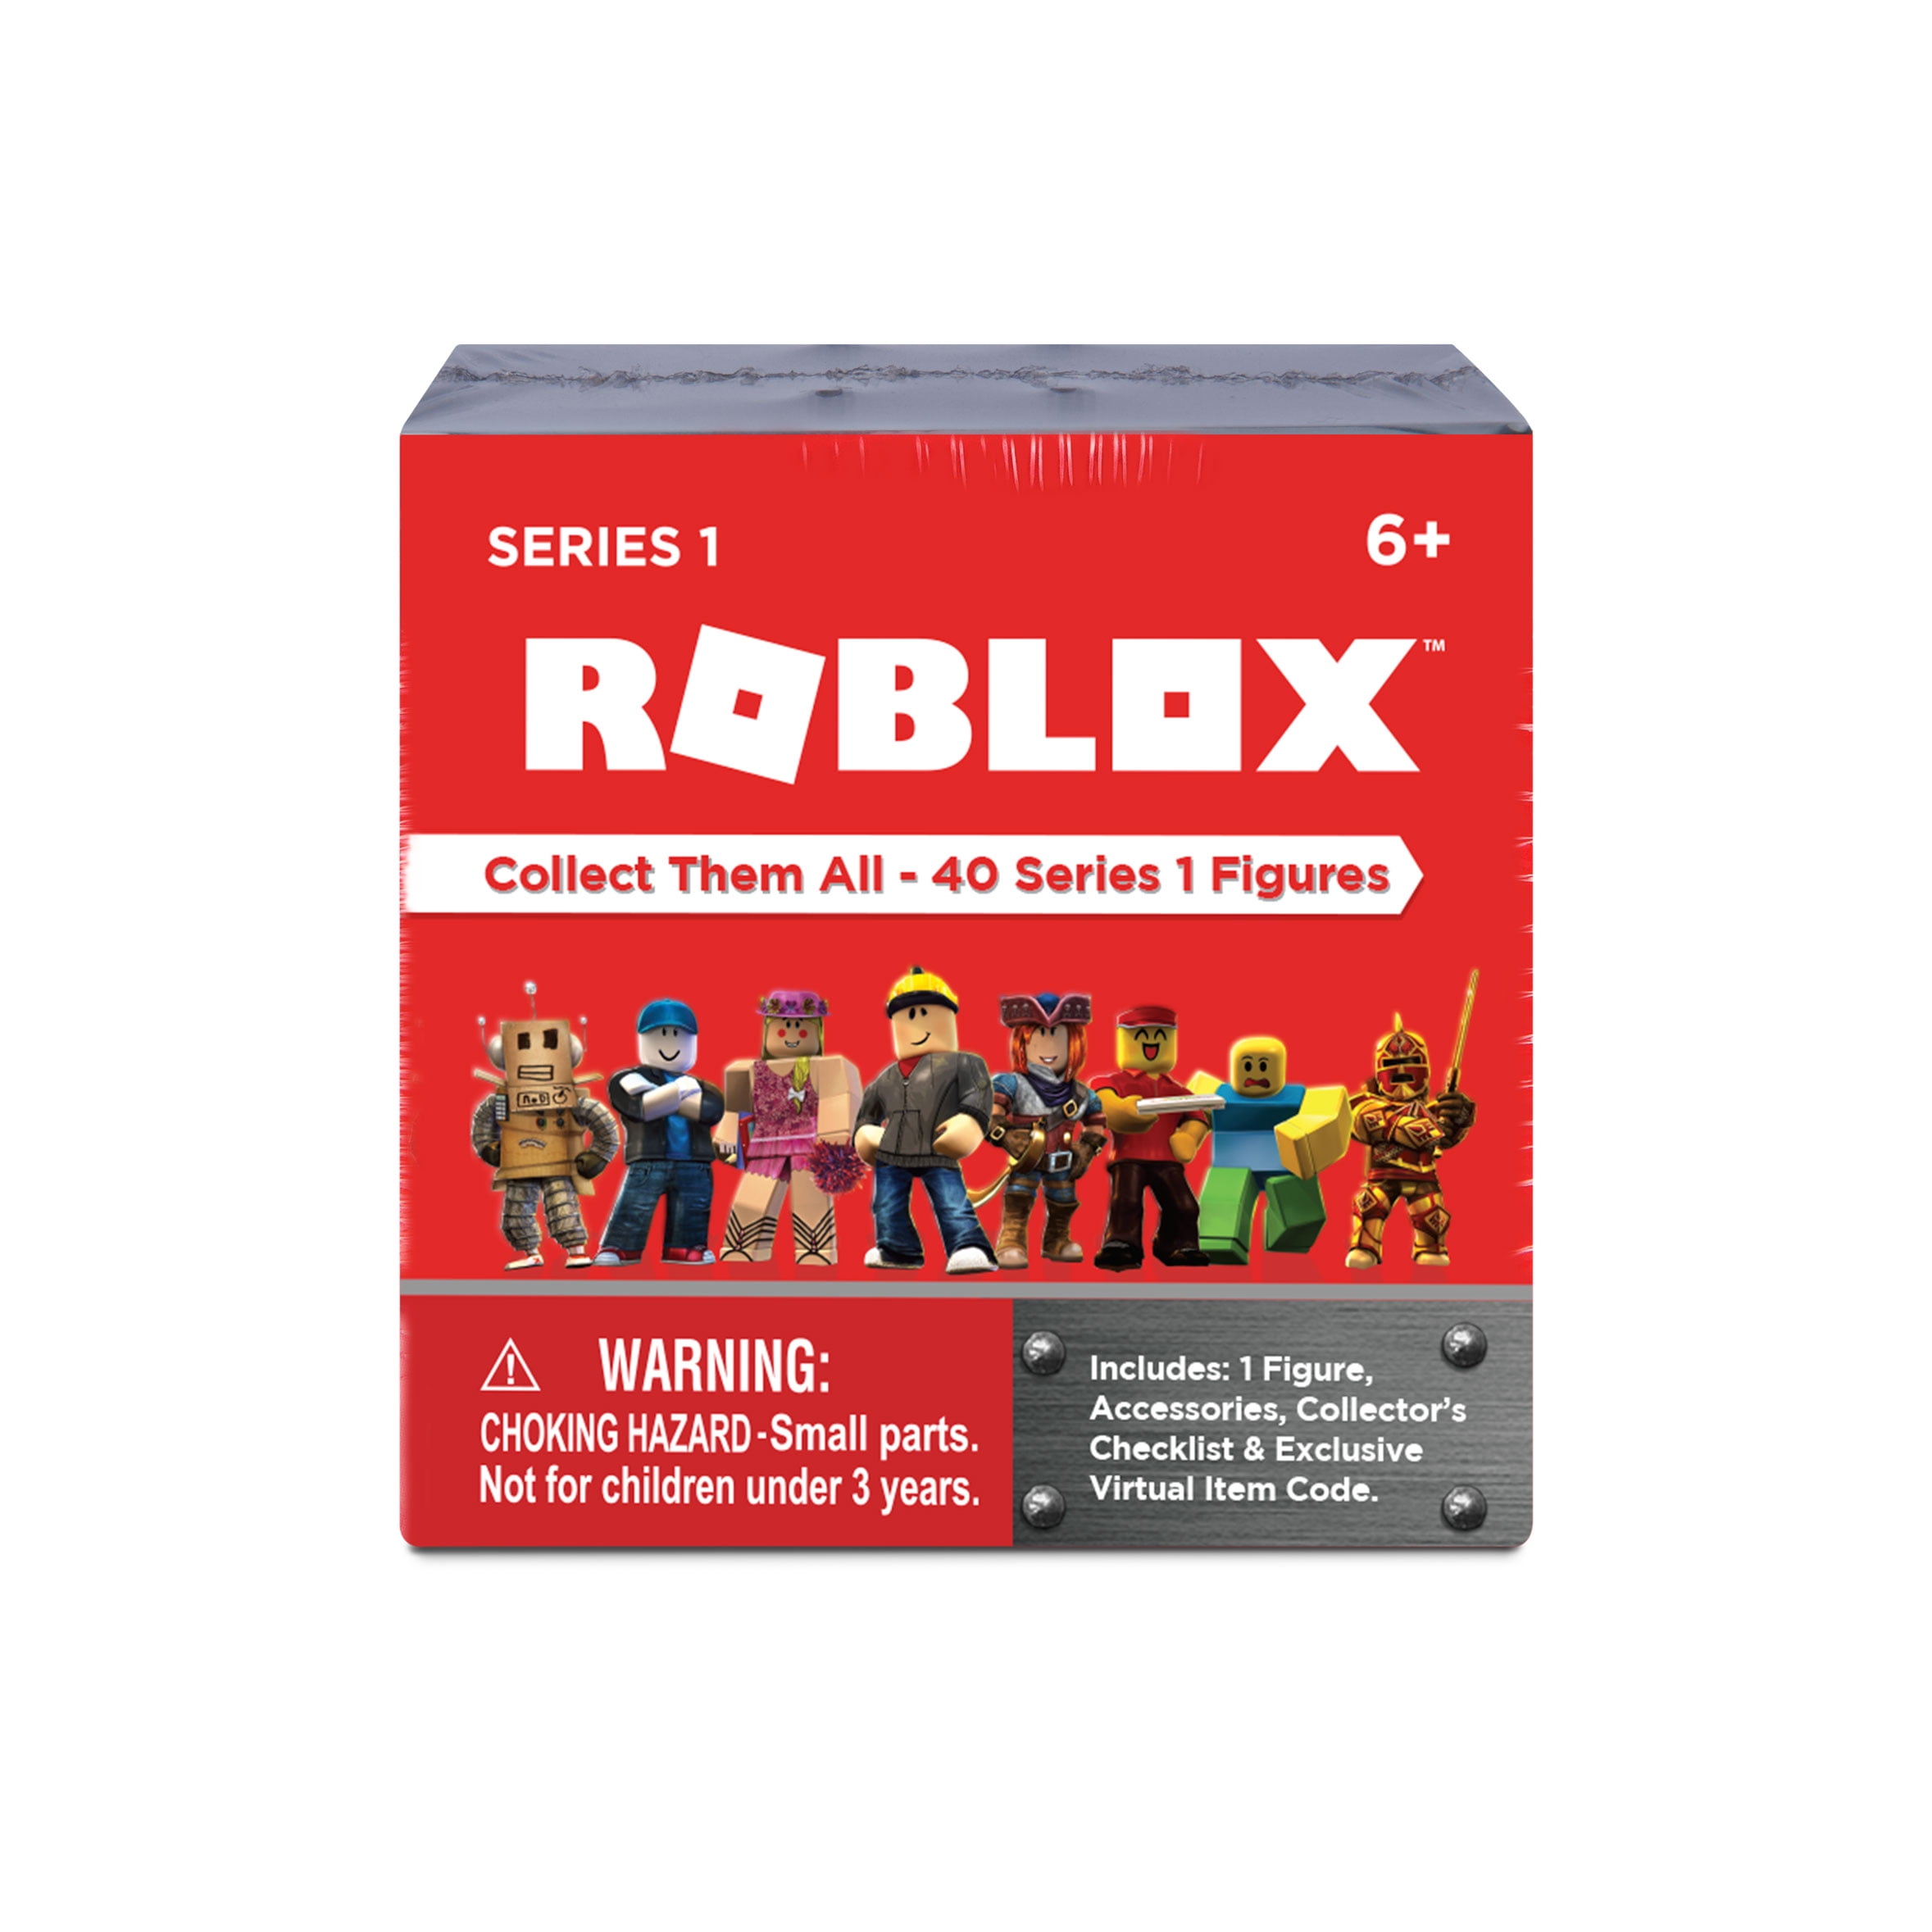 Roblox Action Collection Series 1 Mystery Figure Includes 1 Figure Exclusive Virtual Item Walmart Com Walmart Com - roblox redeem 6 virtual items online code 1 code gets you 6